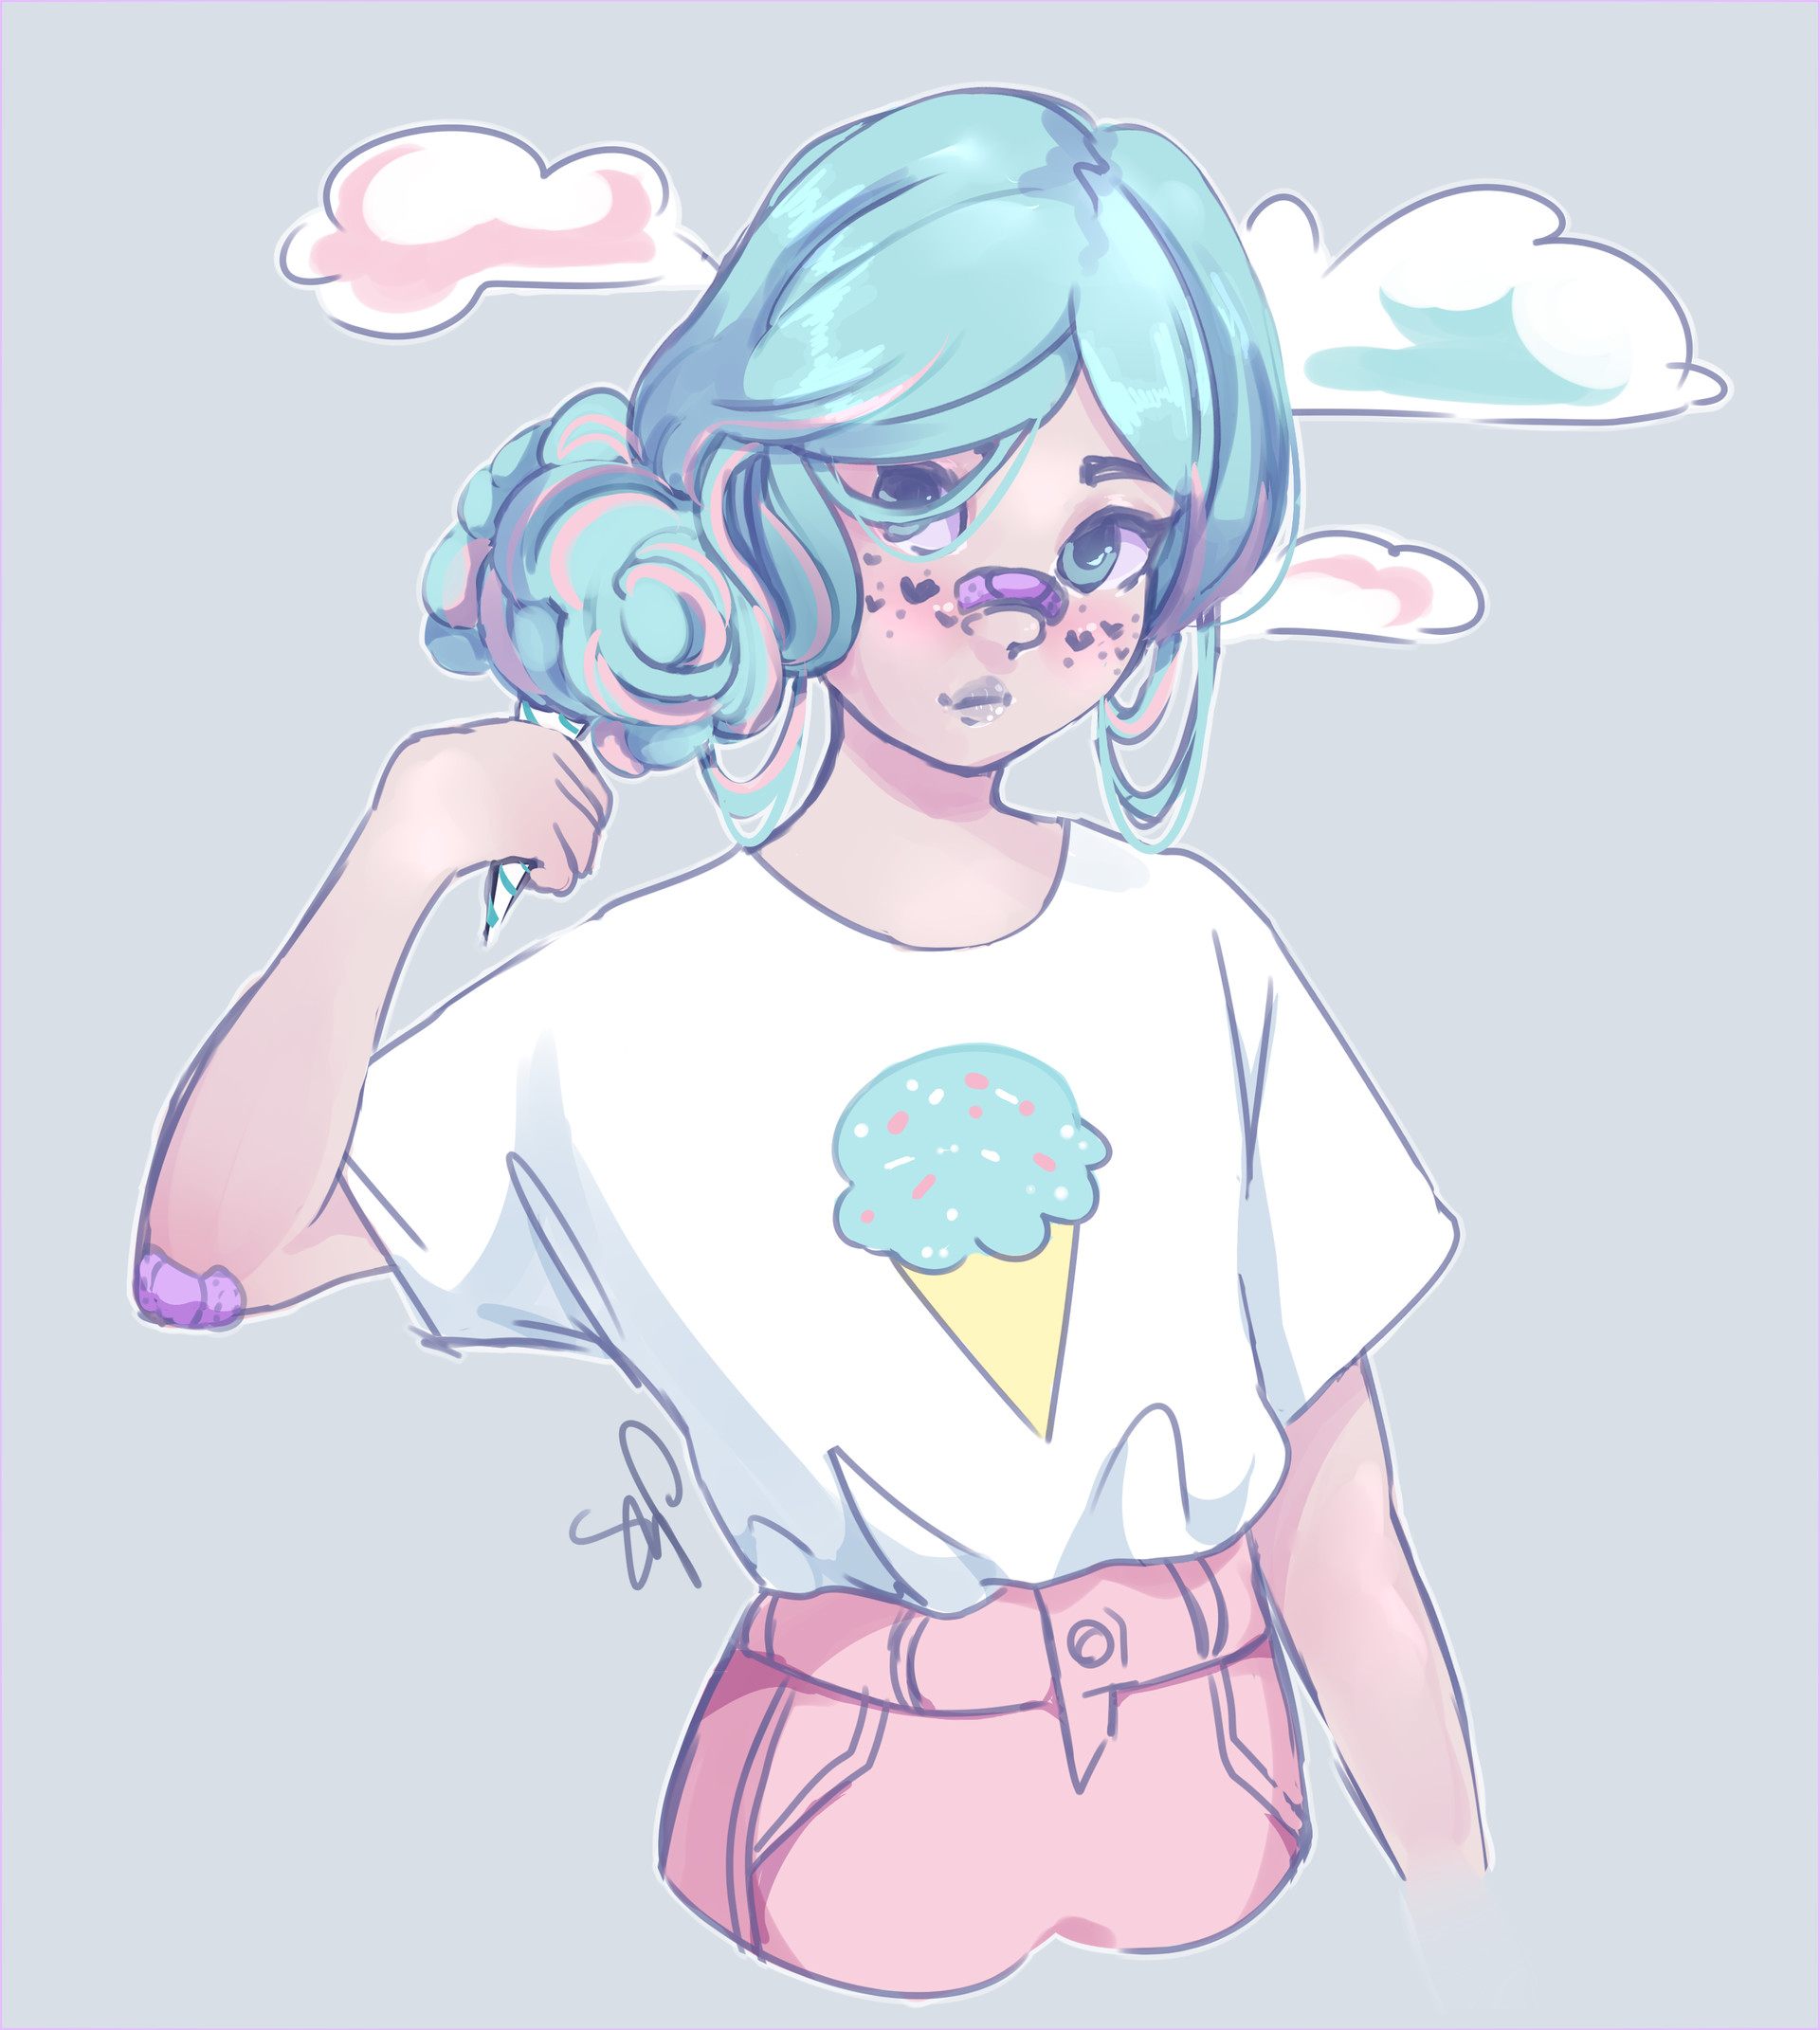 moodybrowneyes: cotton candy